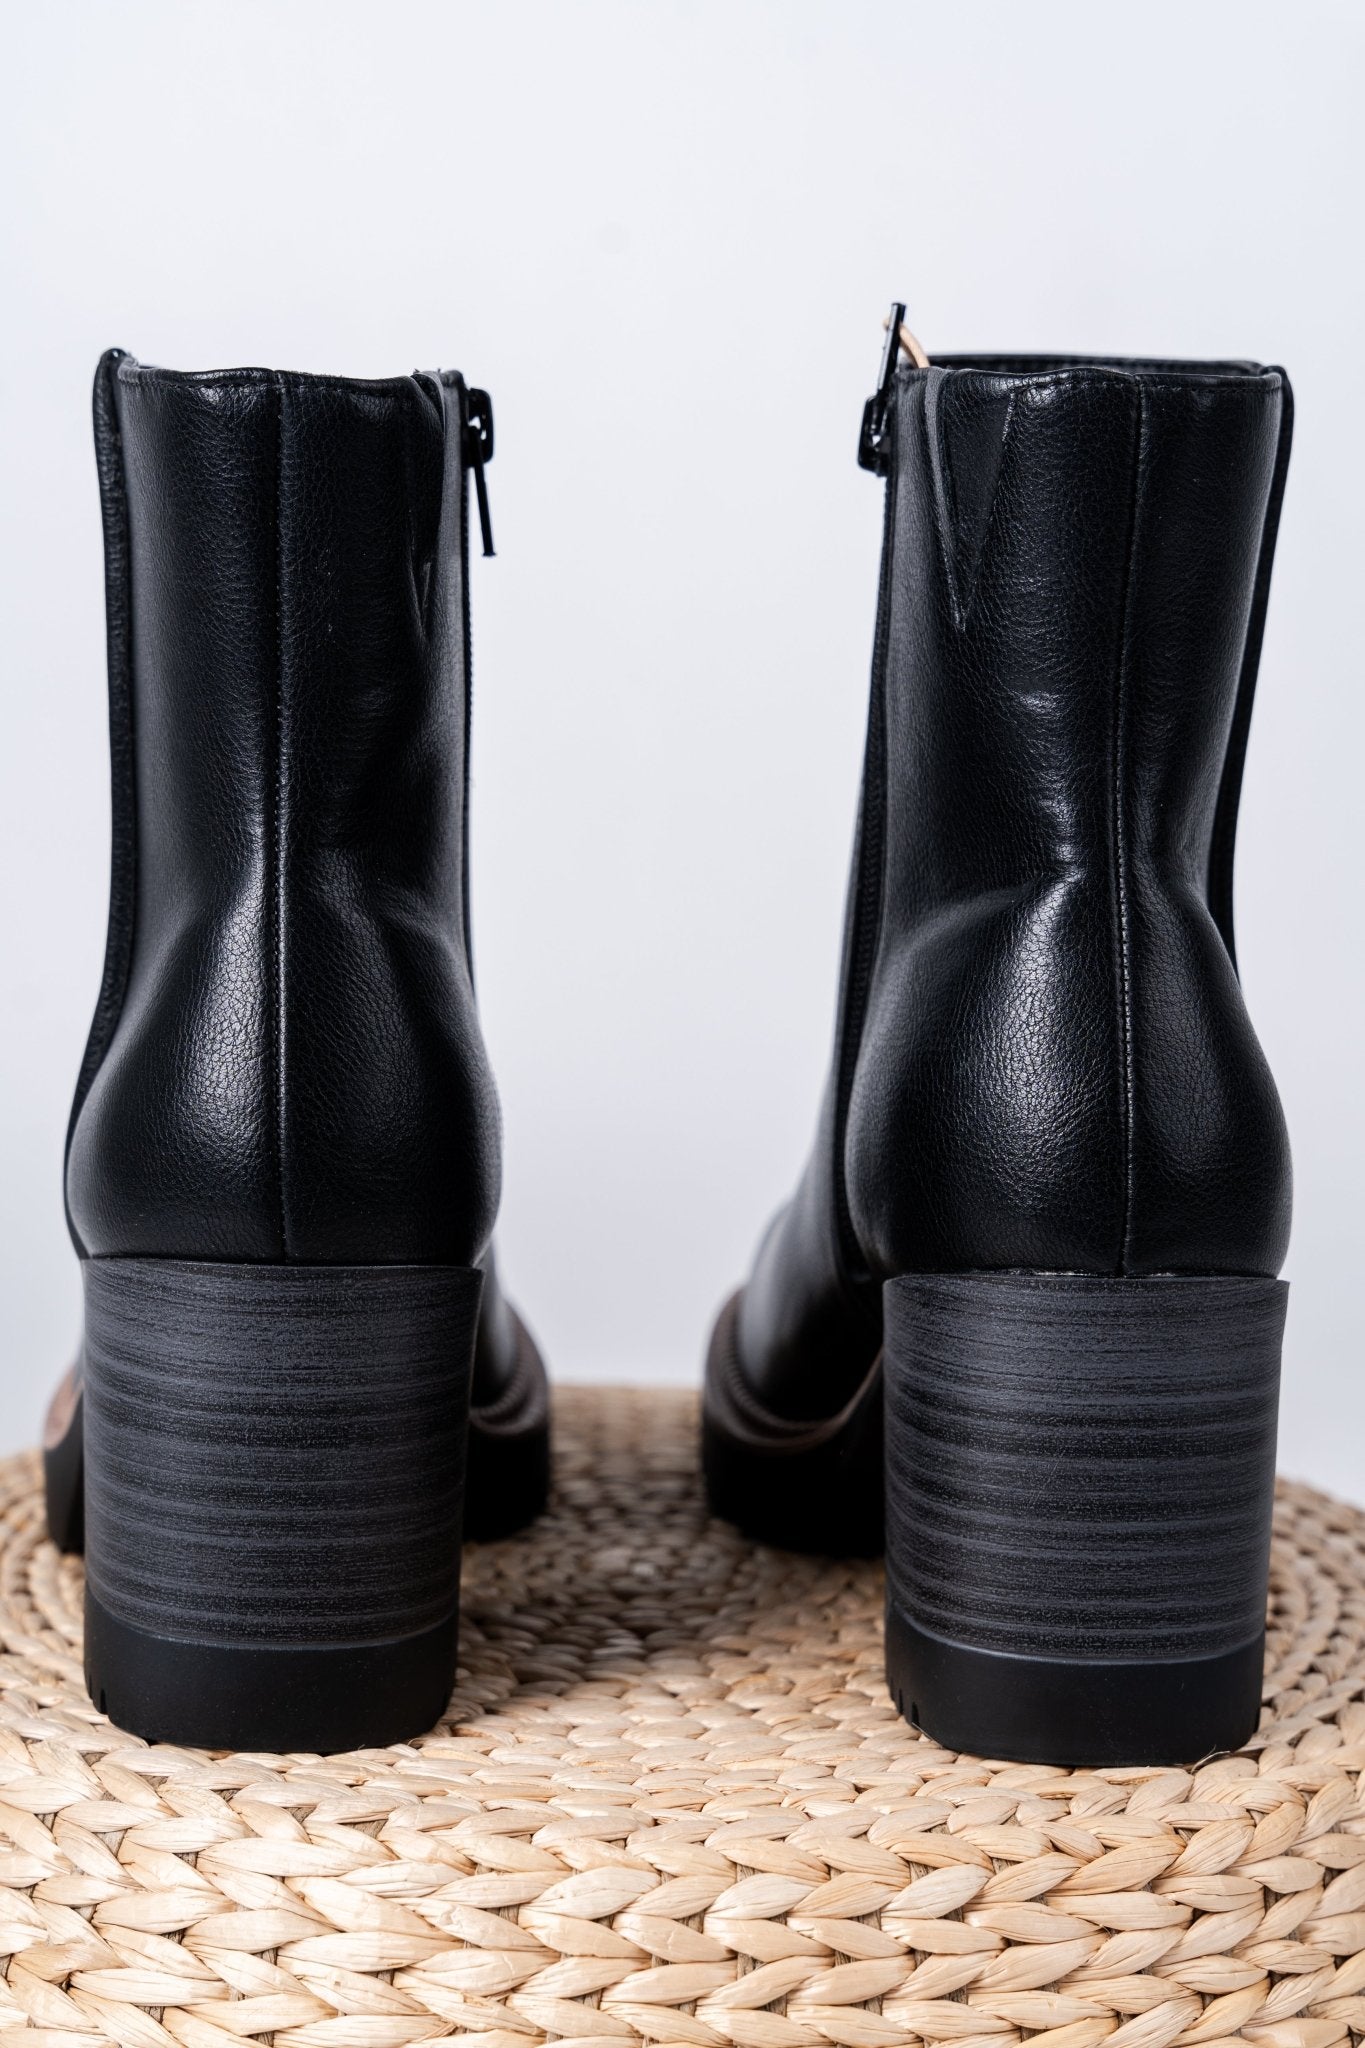 Nathan lug sole booties black - Trendy Shoes - Fashion Shoes at Lush Fashion Lounge Boutique in Oklahoma City